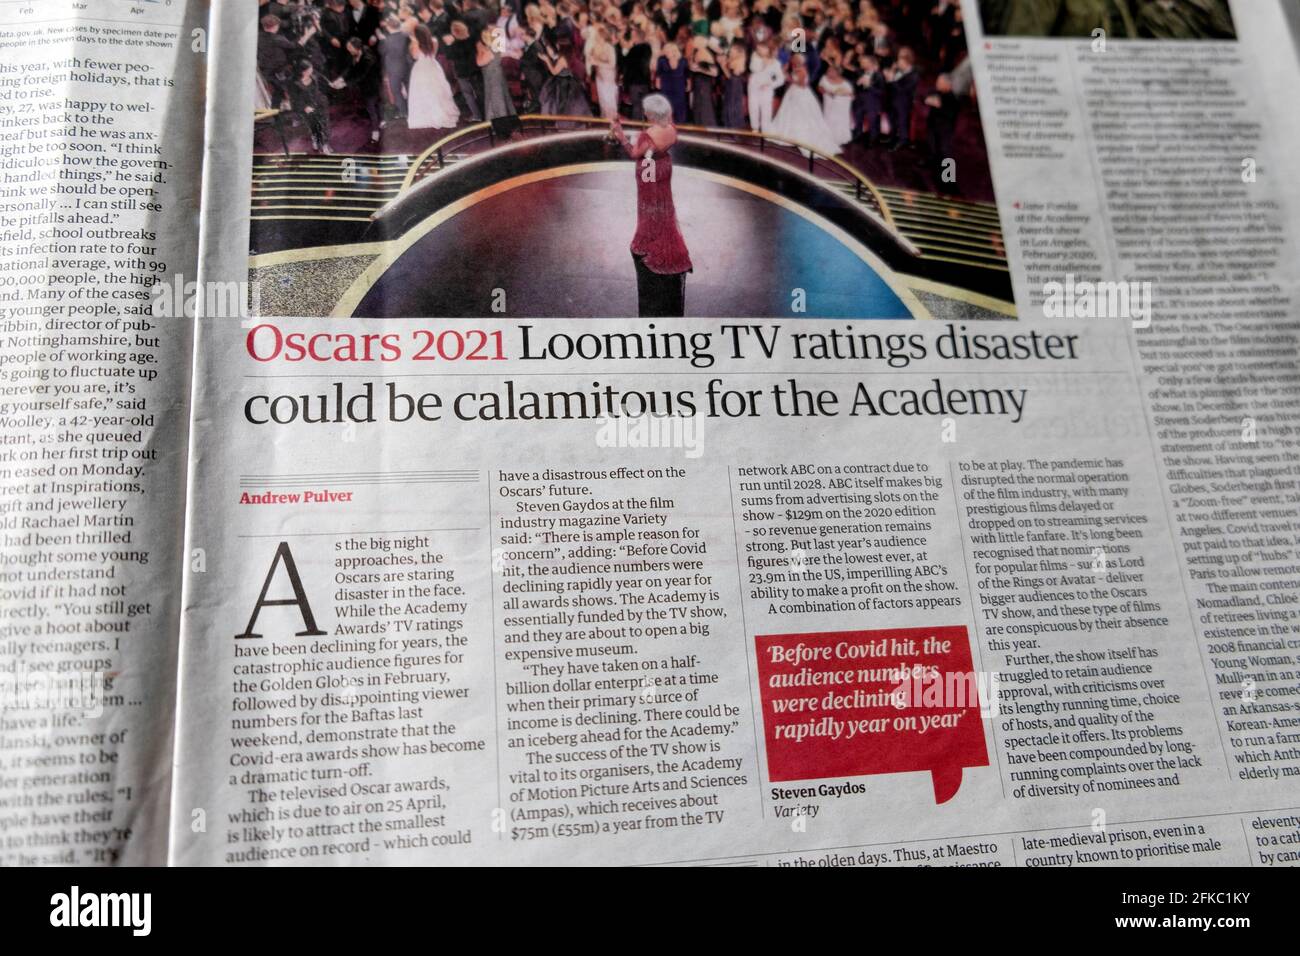 'Oscars 2021 Looming TV ratings disaster could be calamitous for the Academy' Guardian newspaper headline inside article 17 April 2021 London UK Stock Photo